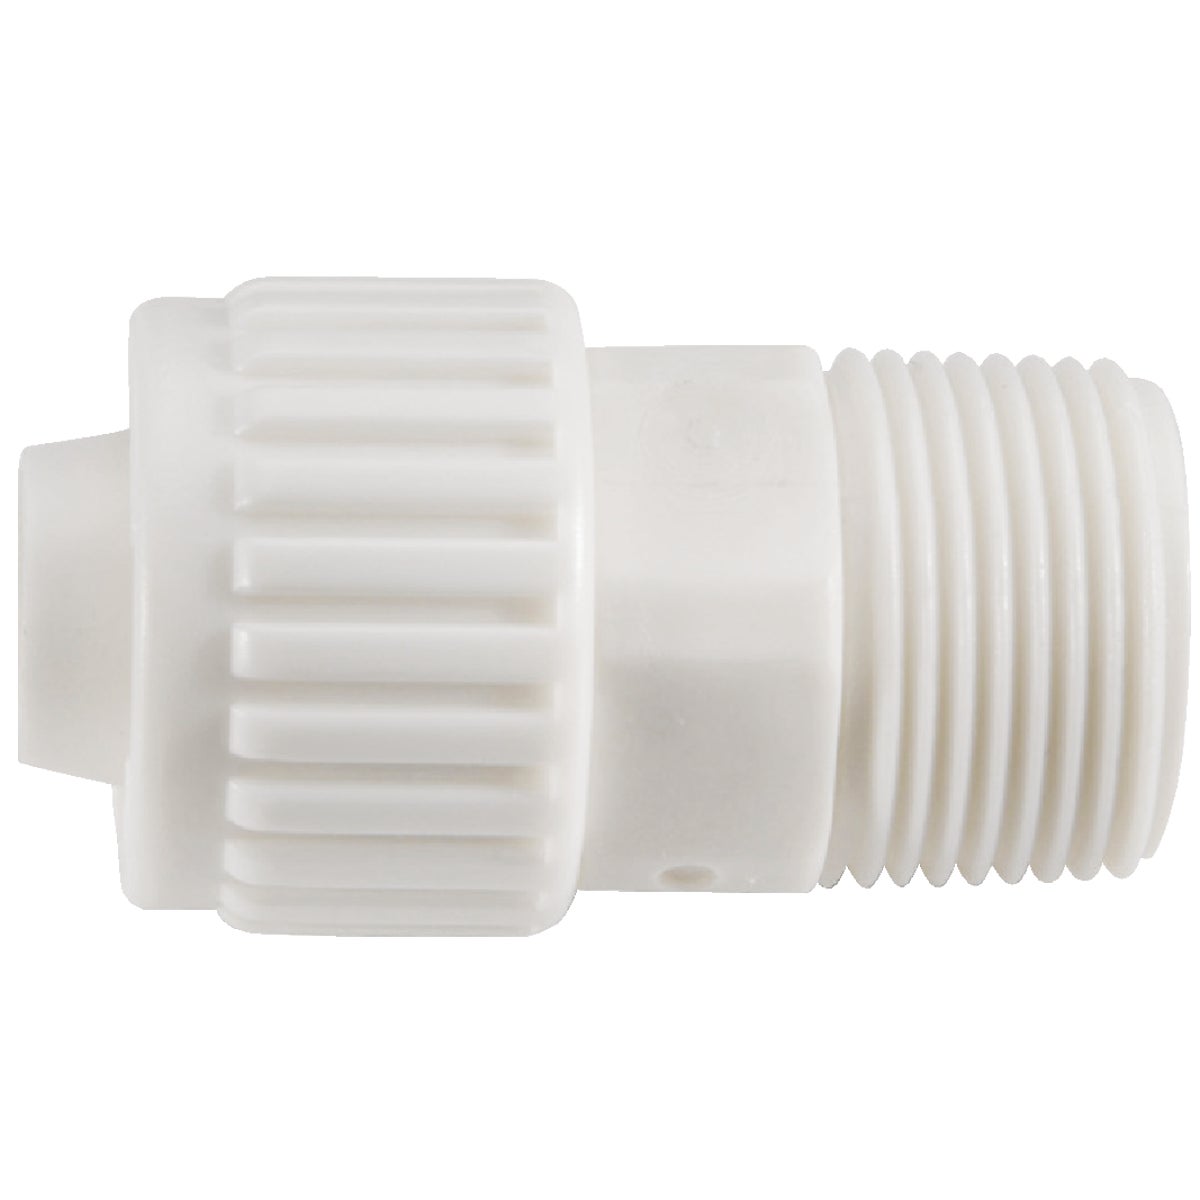 Item 488216, Adapters with Male threads and a Flair-It connection.